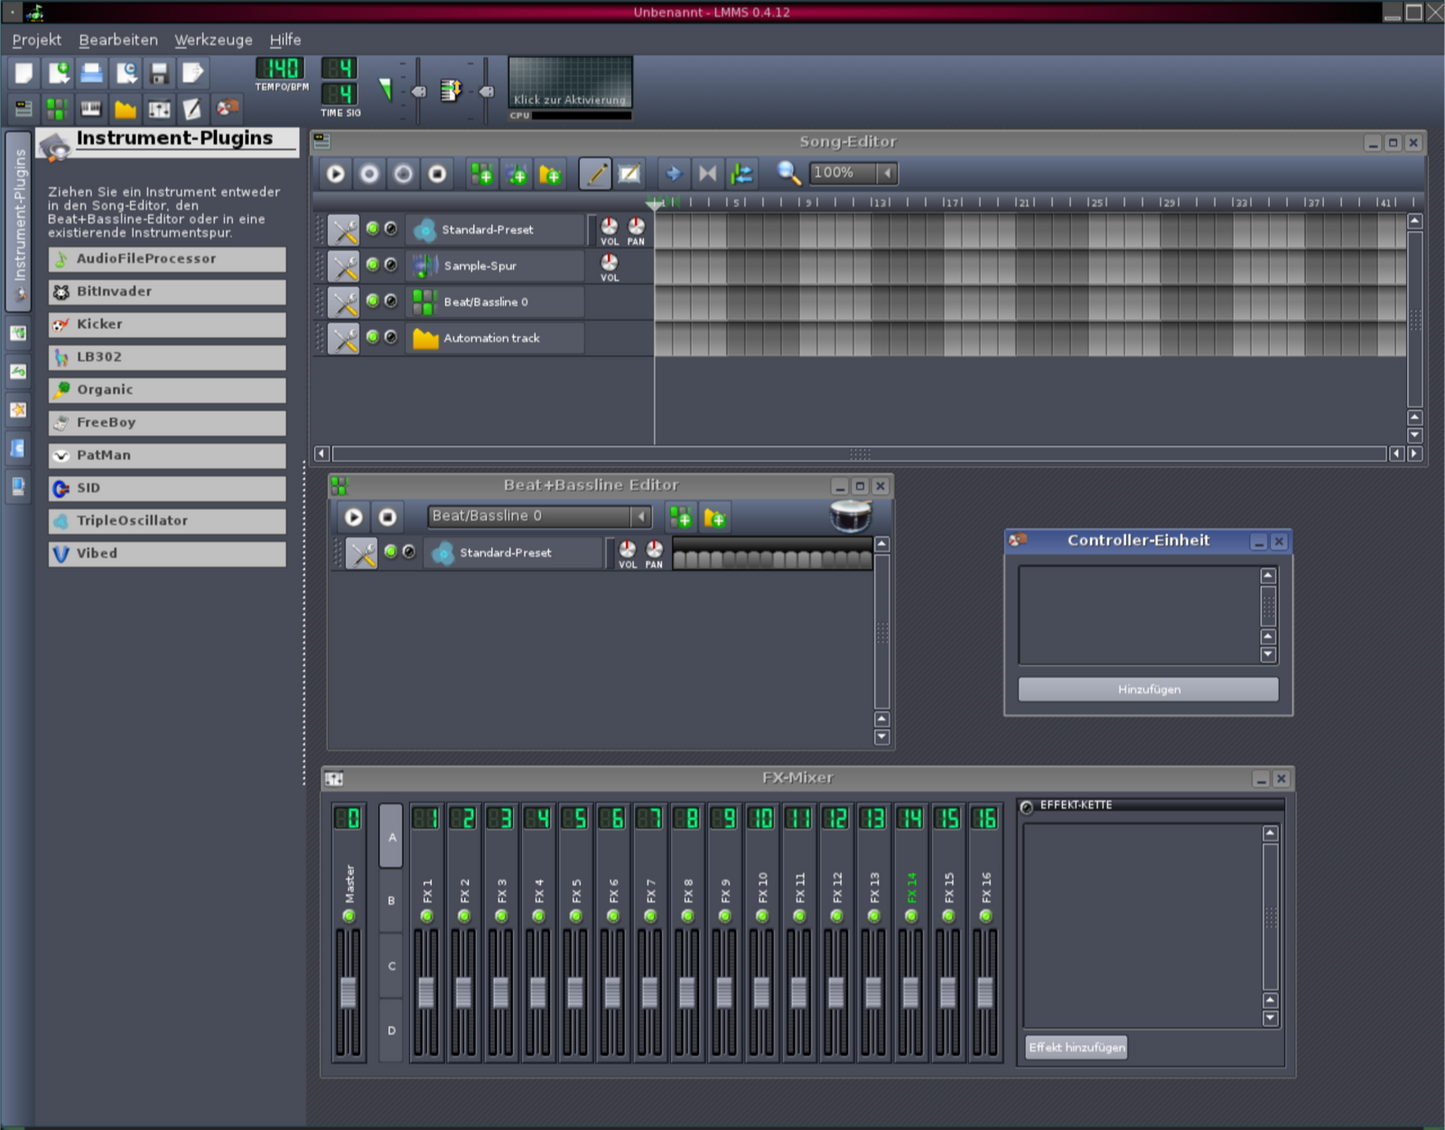 LMMS Pro Music Production - Multi Track Audio Editing & Mixing DAW Software on CD-ROM